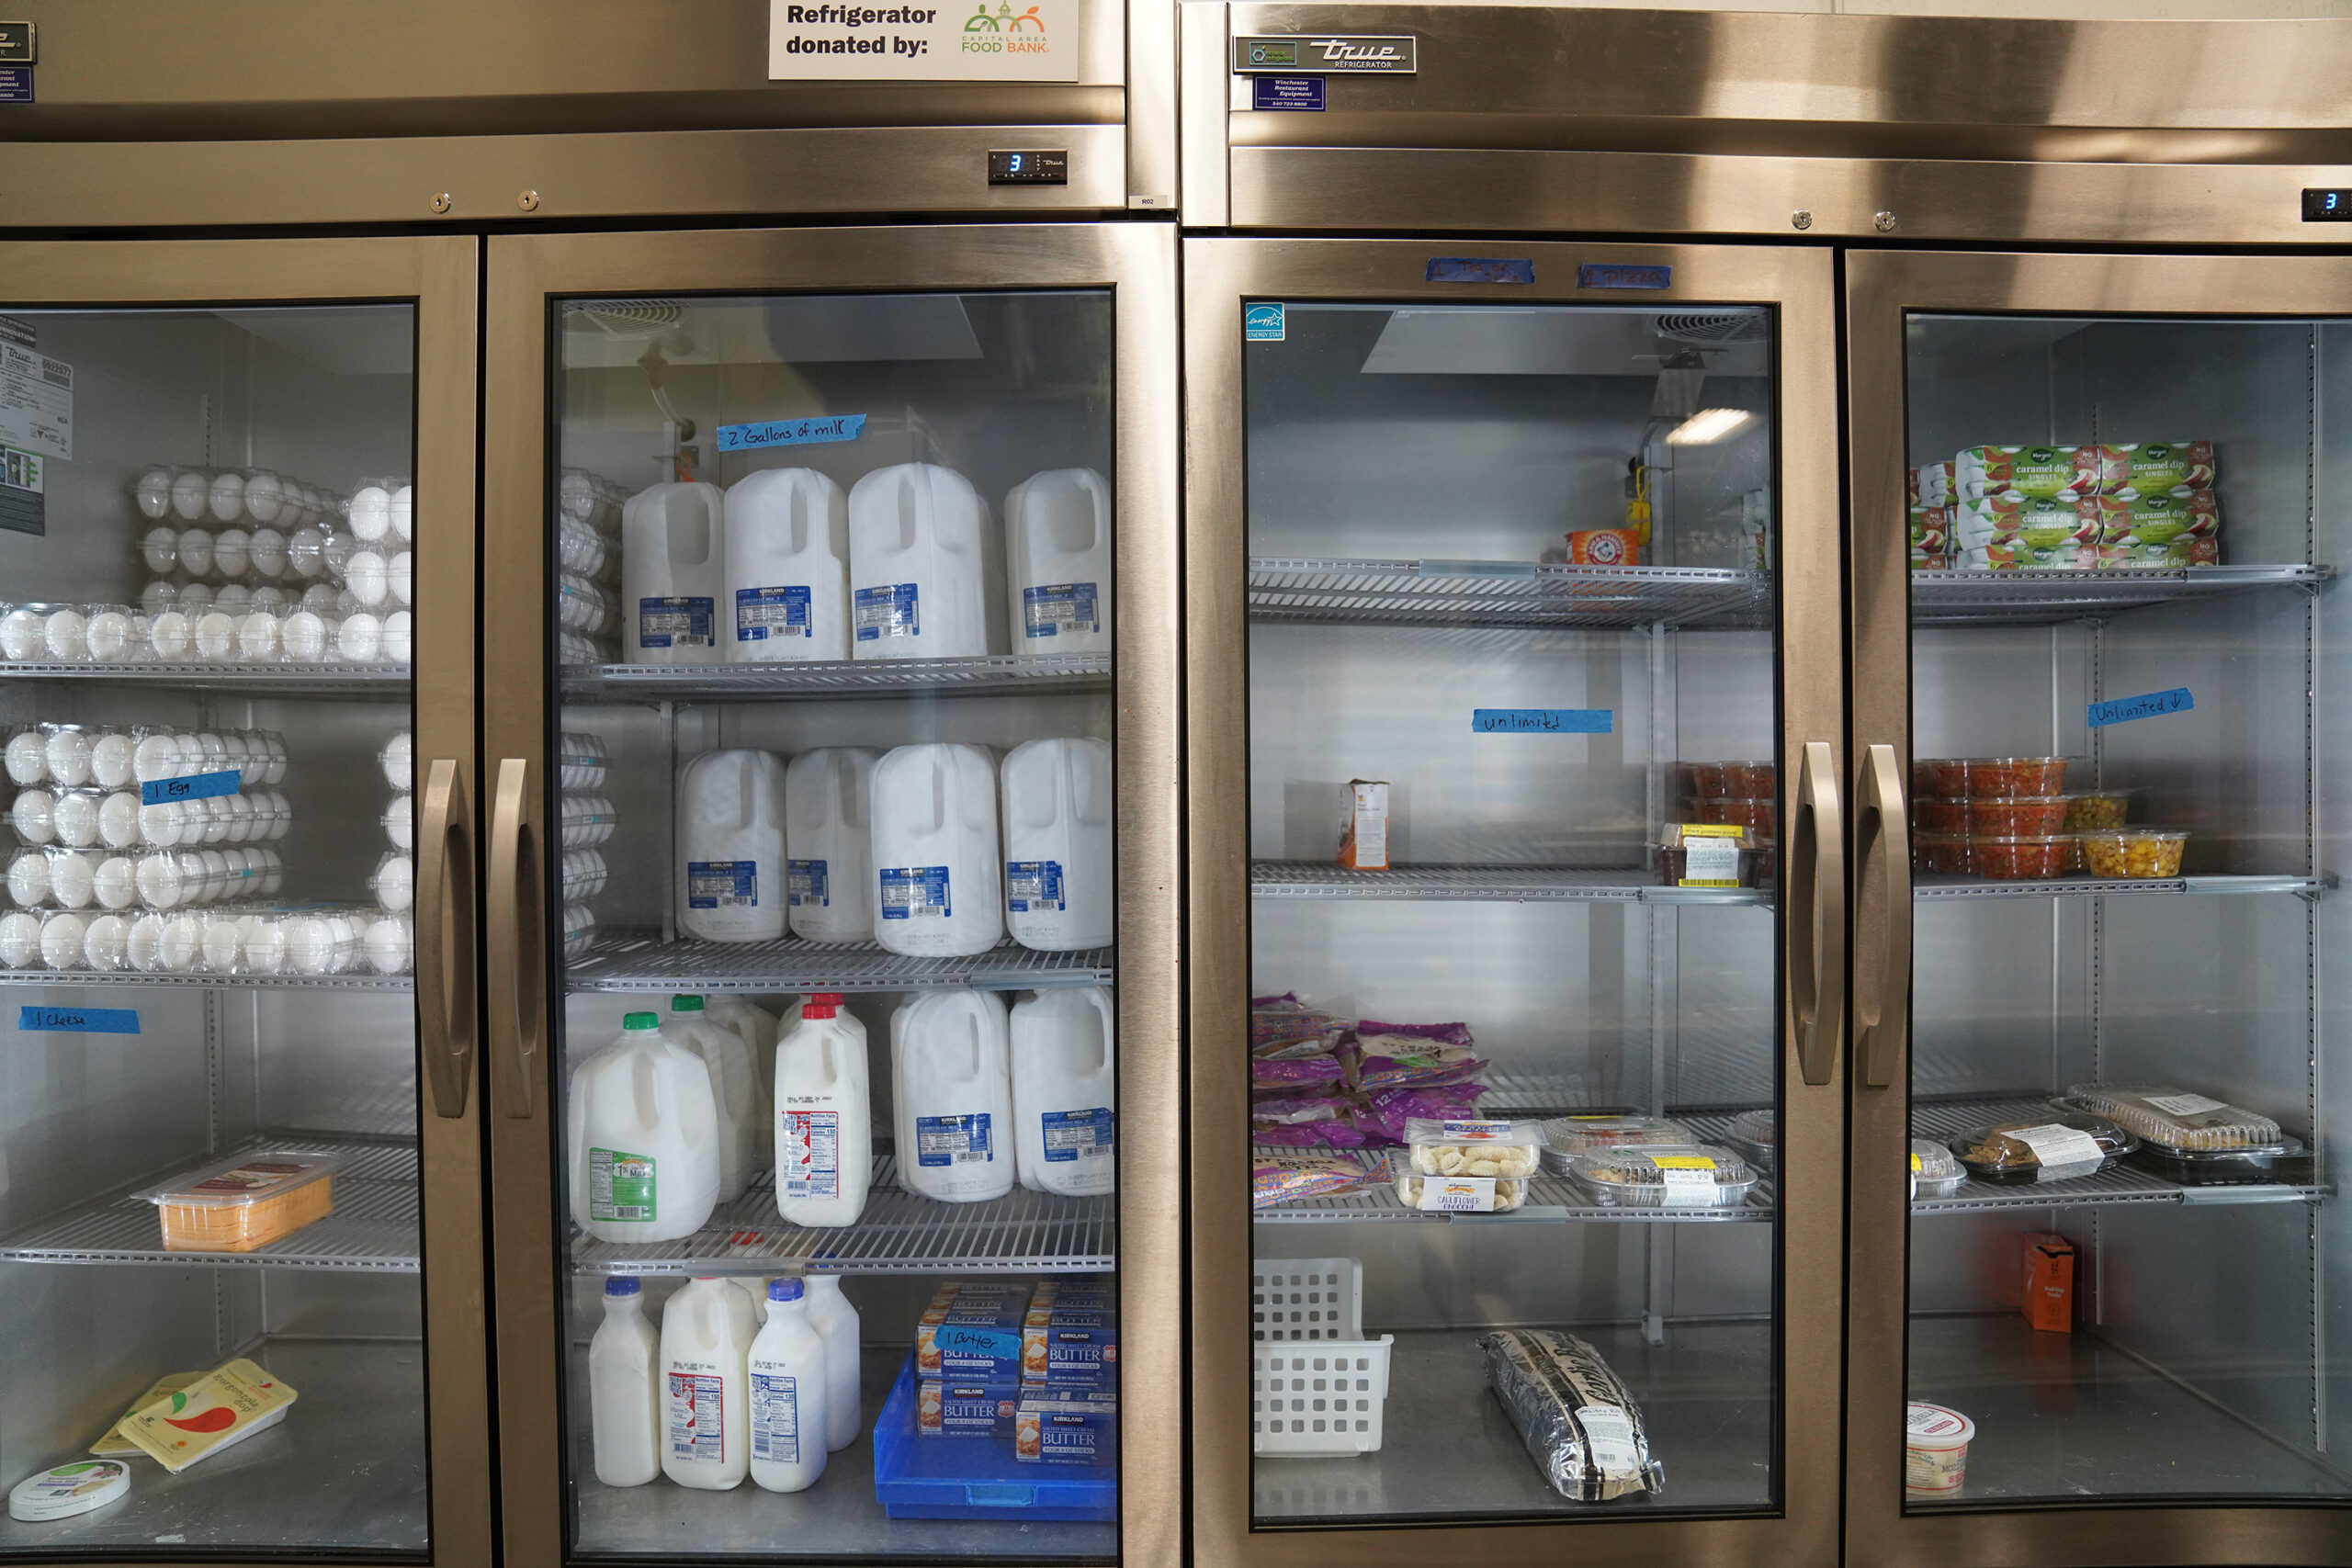 large industrial refrigerators filled with milk, eggs and other foods